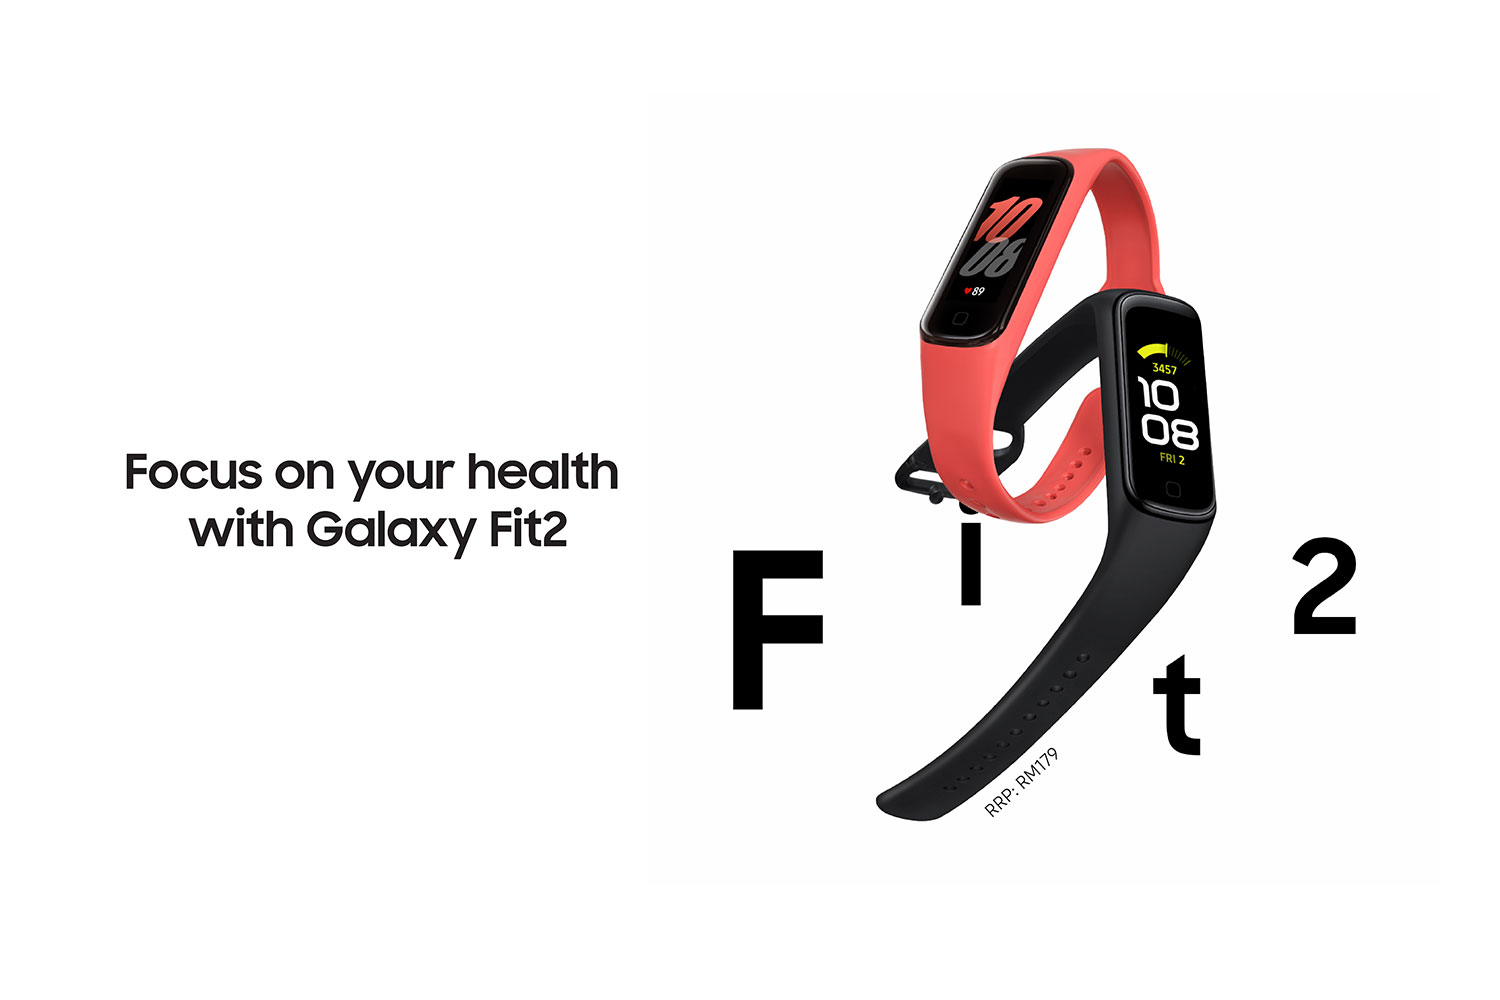 Samsung Galaxy Fit2 Retails at RM179